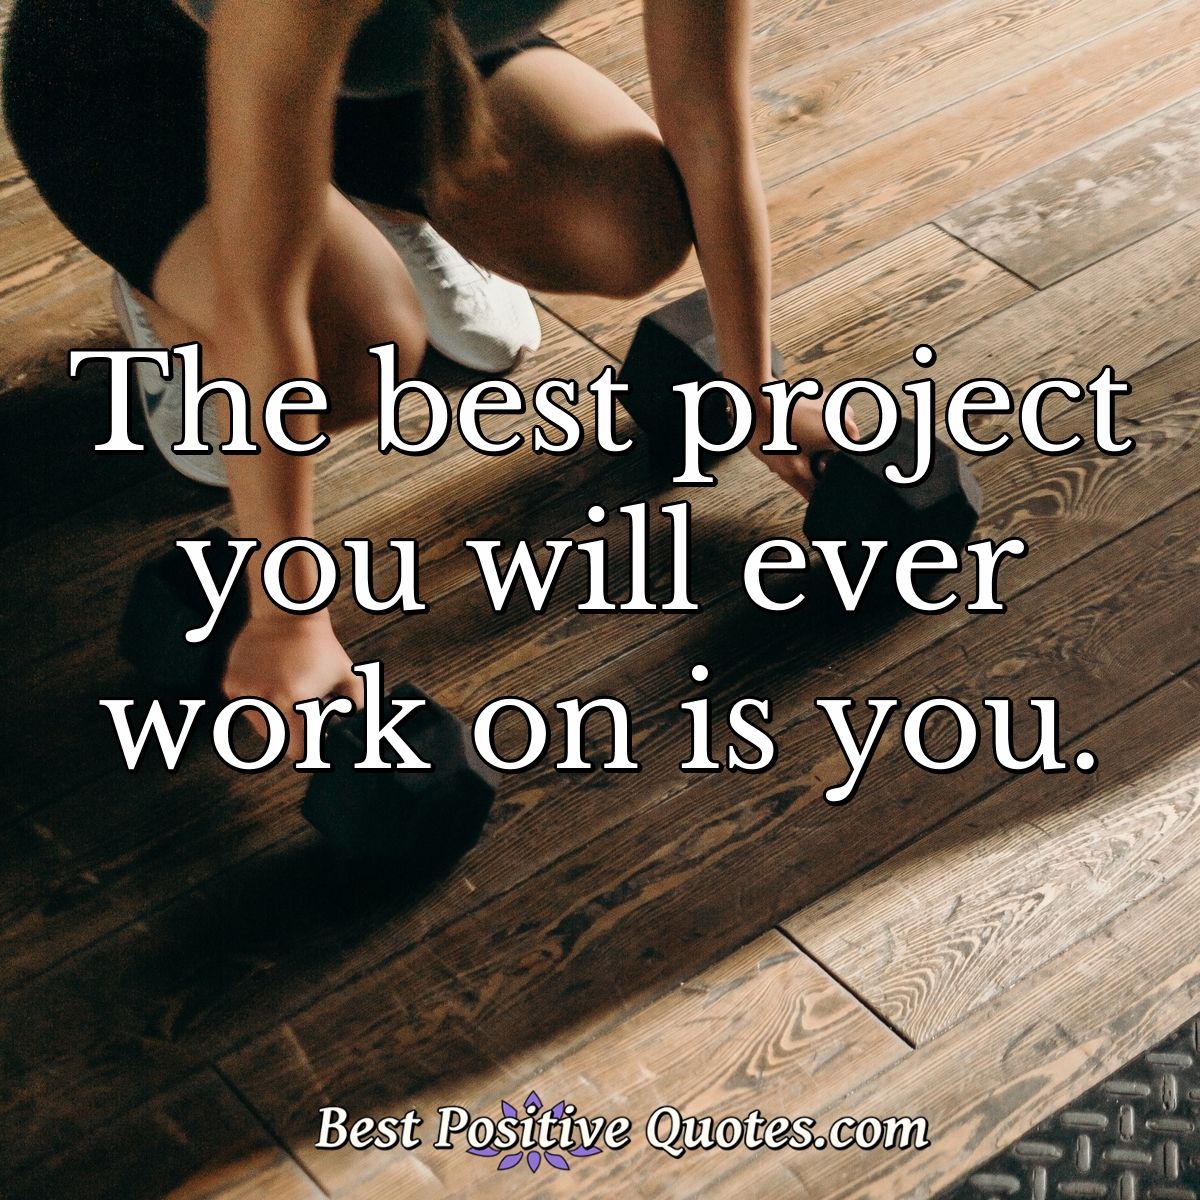 The best project you will ever work on is you. - Anonymous